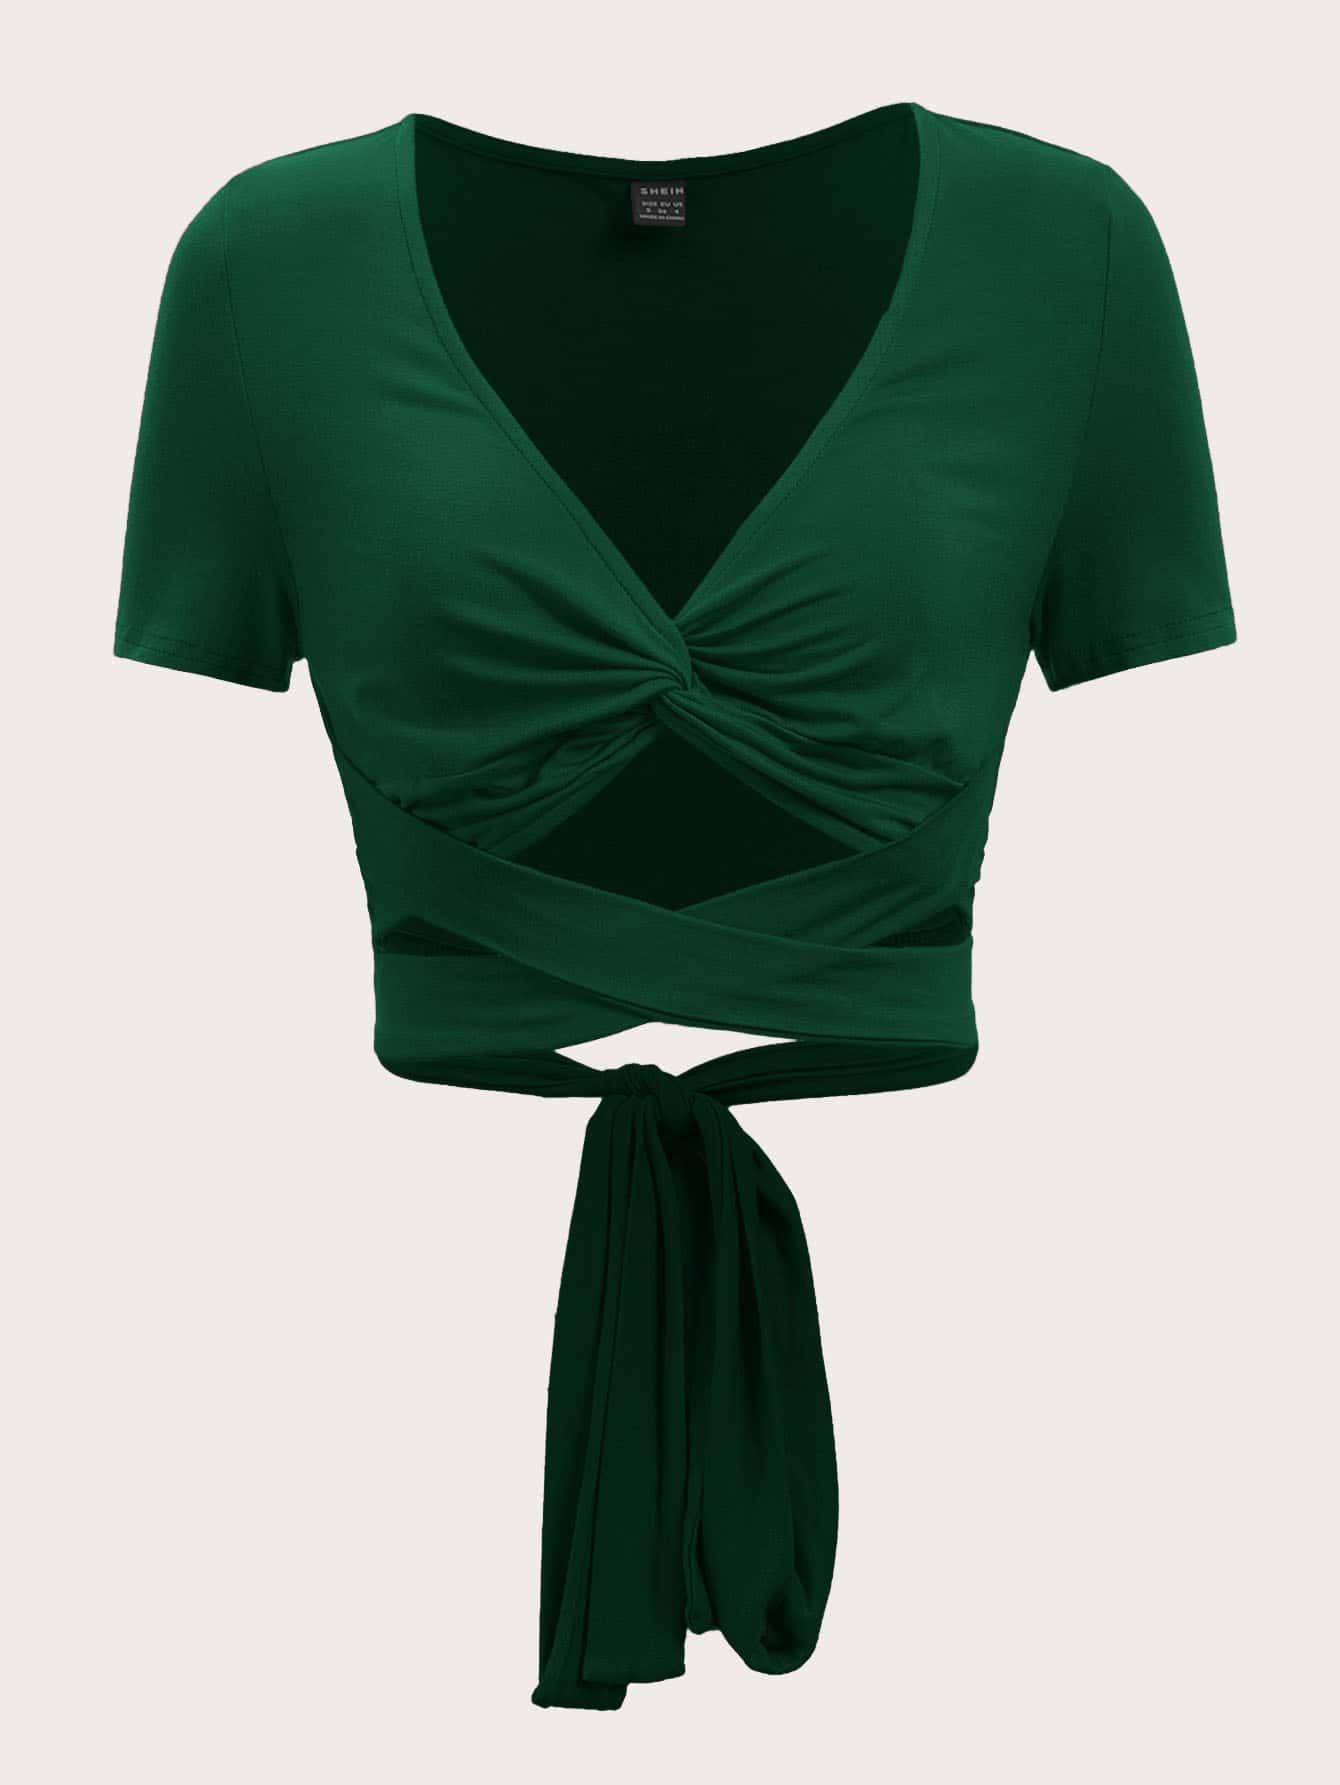 Best 13 Emerald Green Top Outfit Ideas for Women: Style Guide